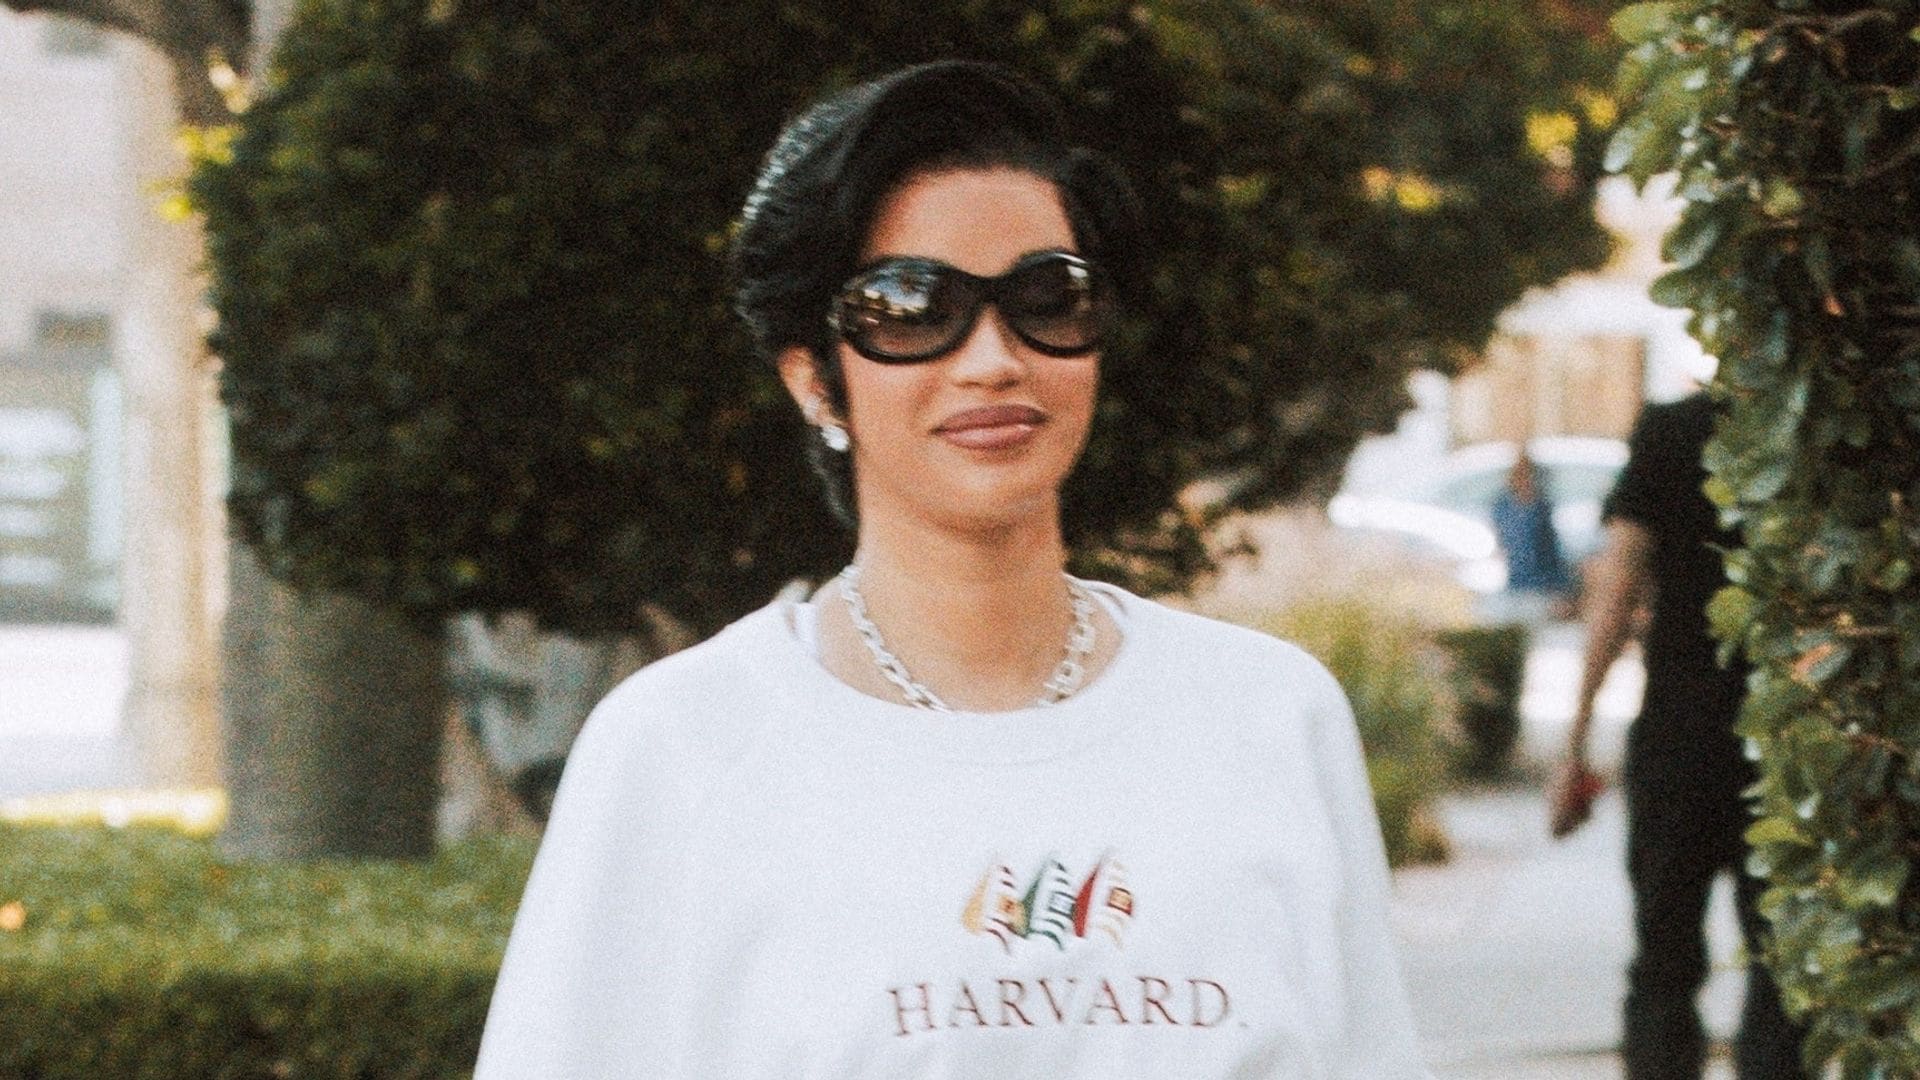 Cardi B enters her Princess Diana era recreating one of her iconic looks